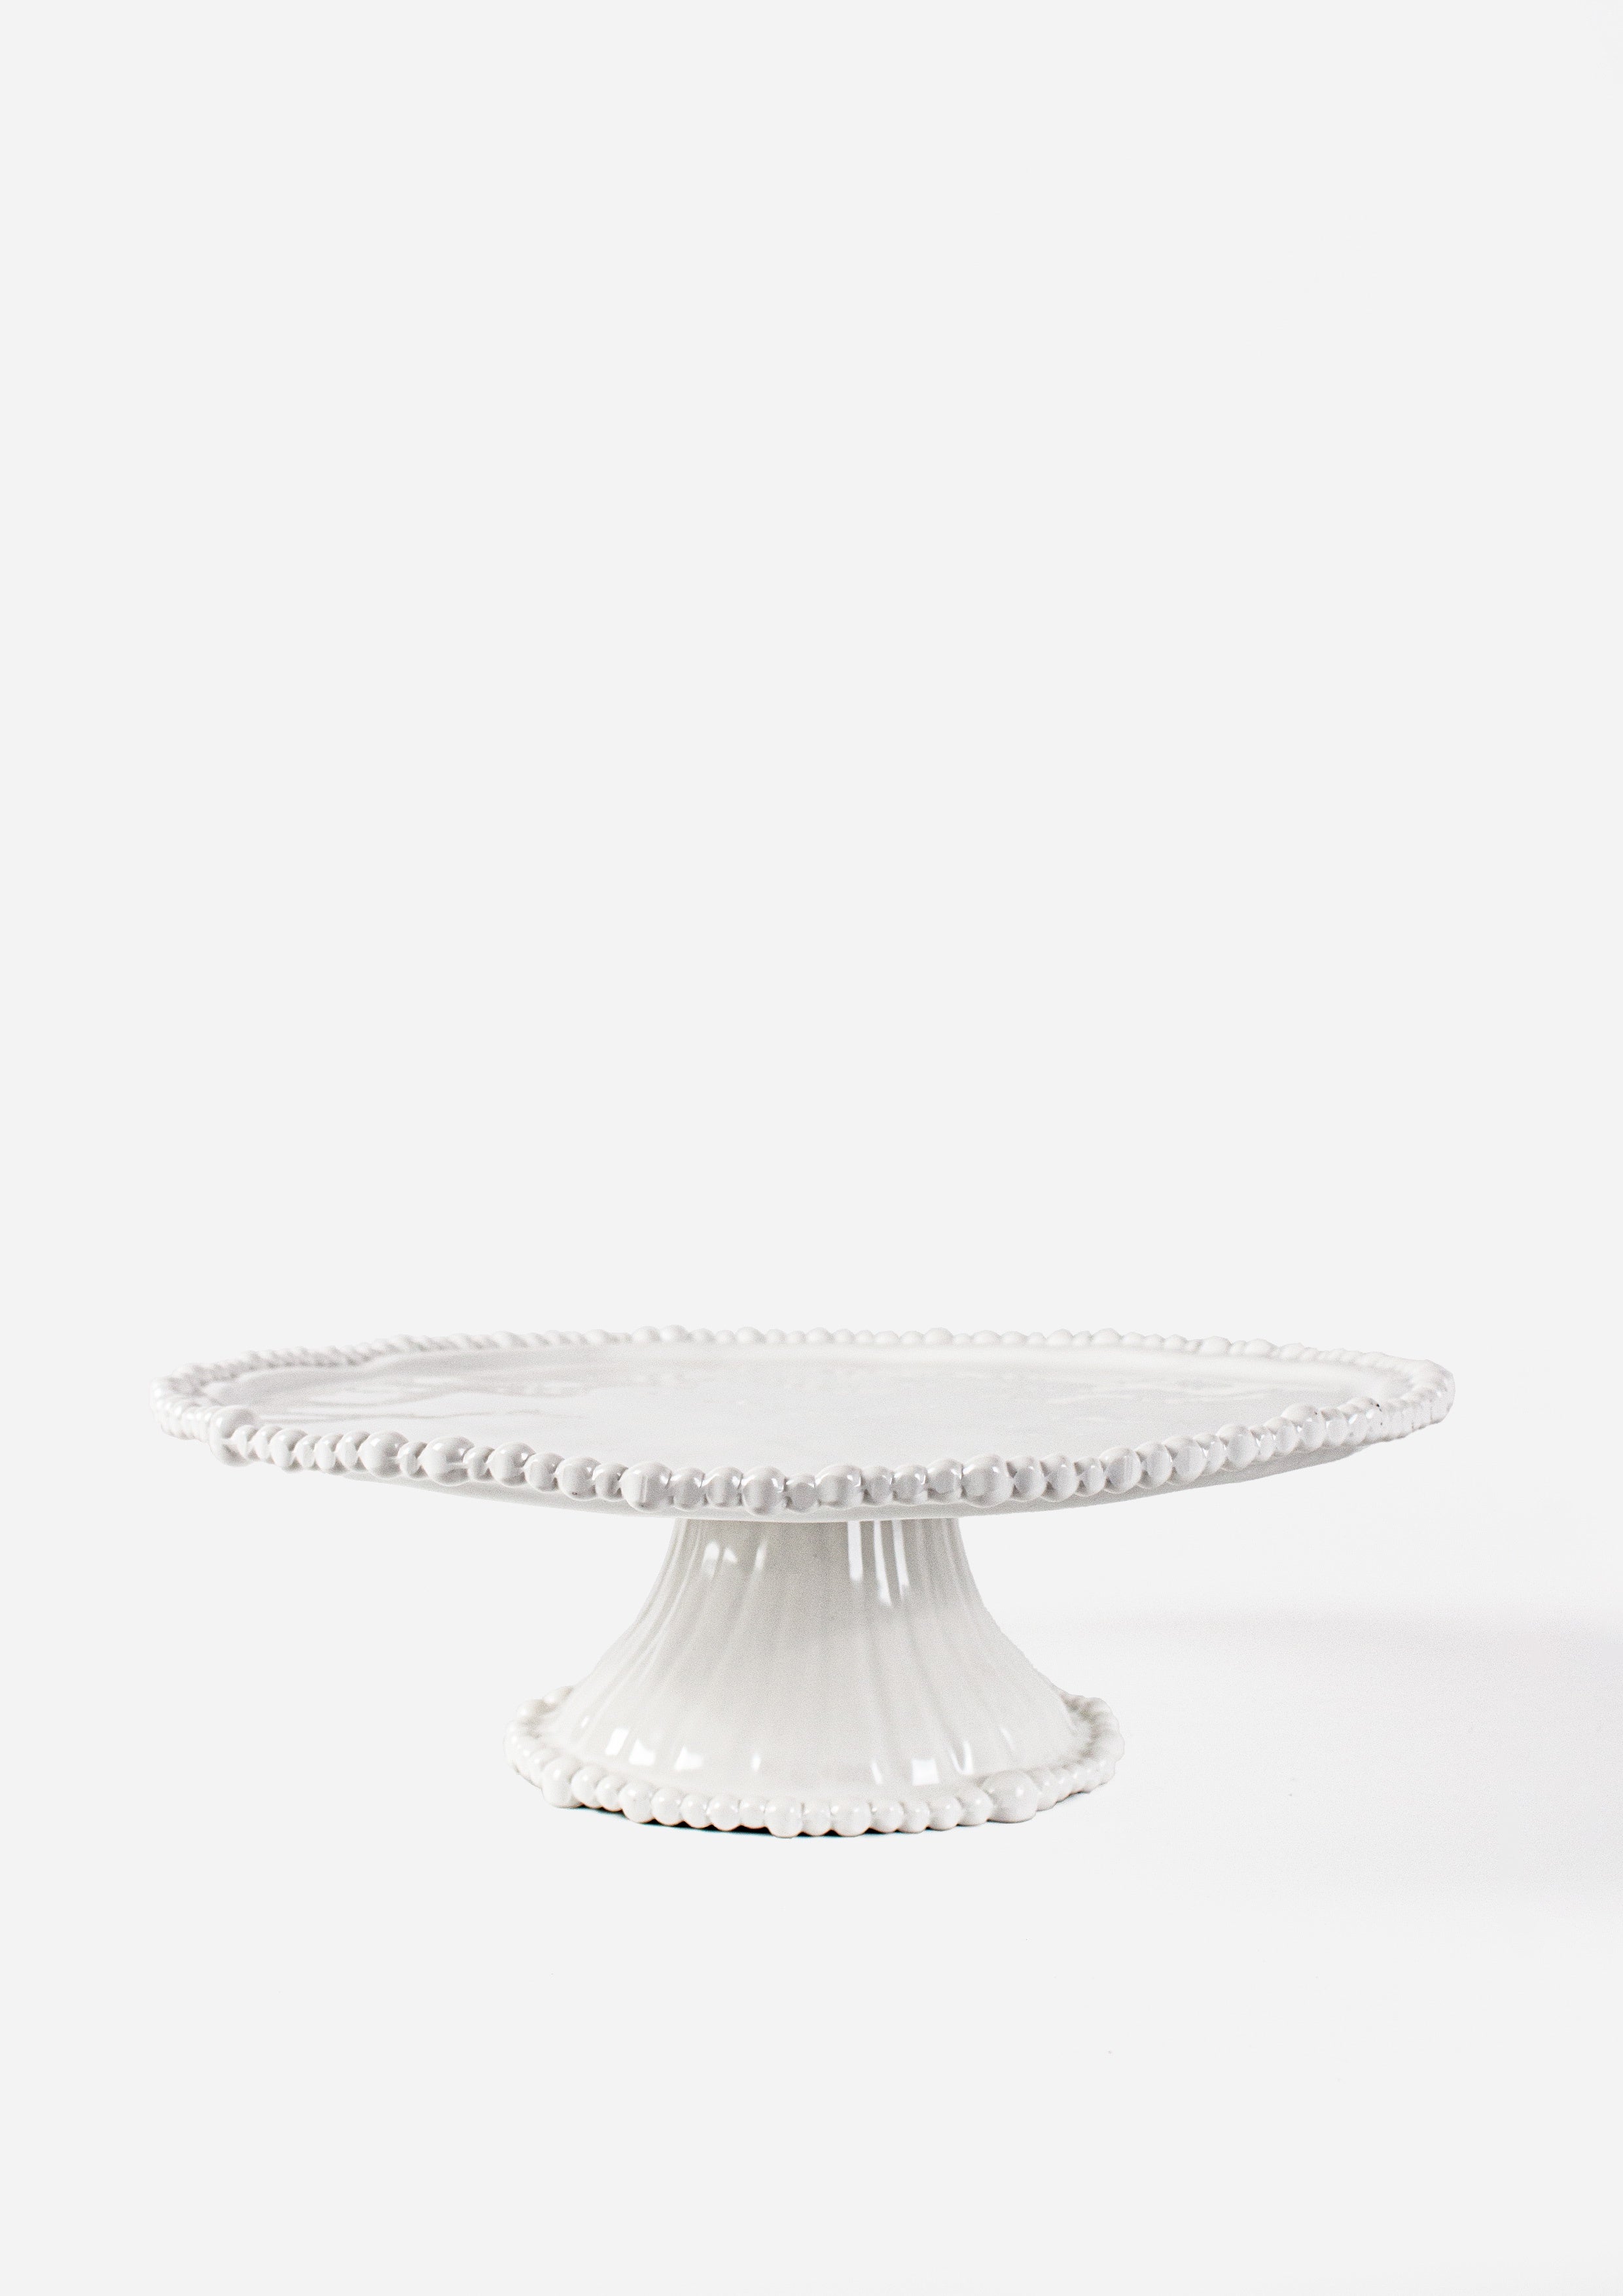 Pearl Cake Stand